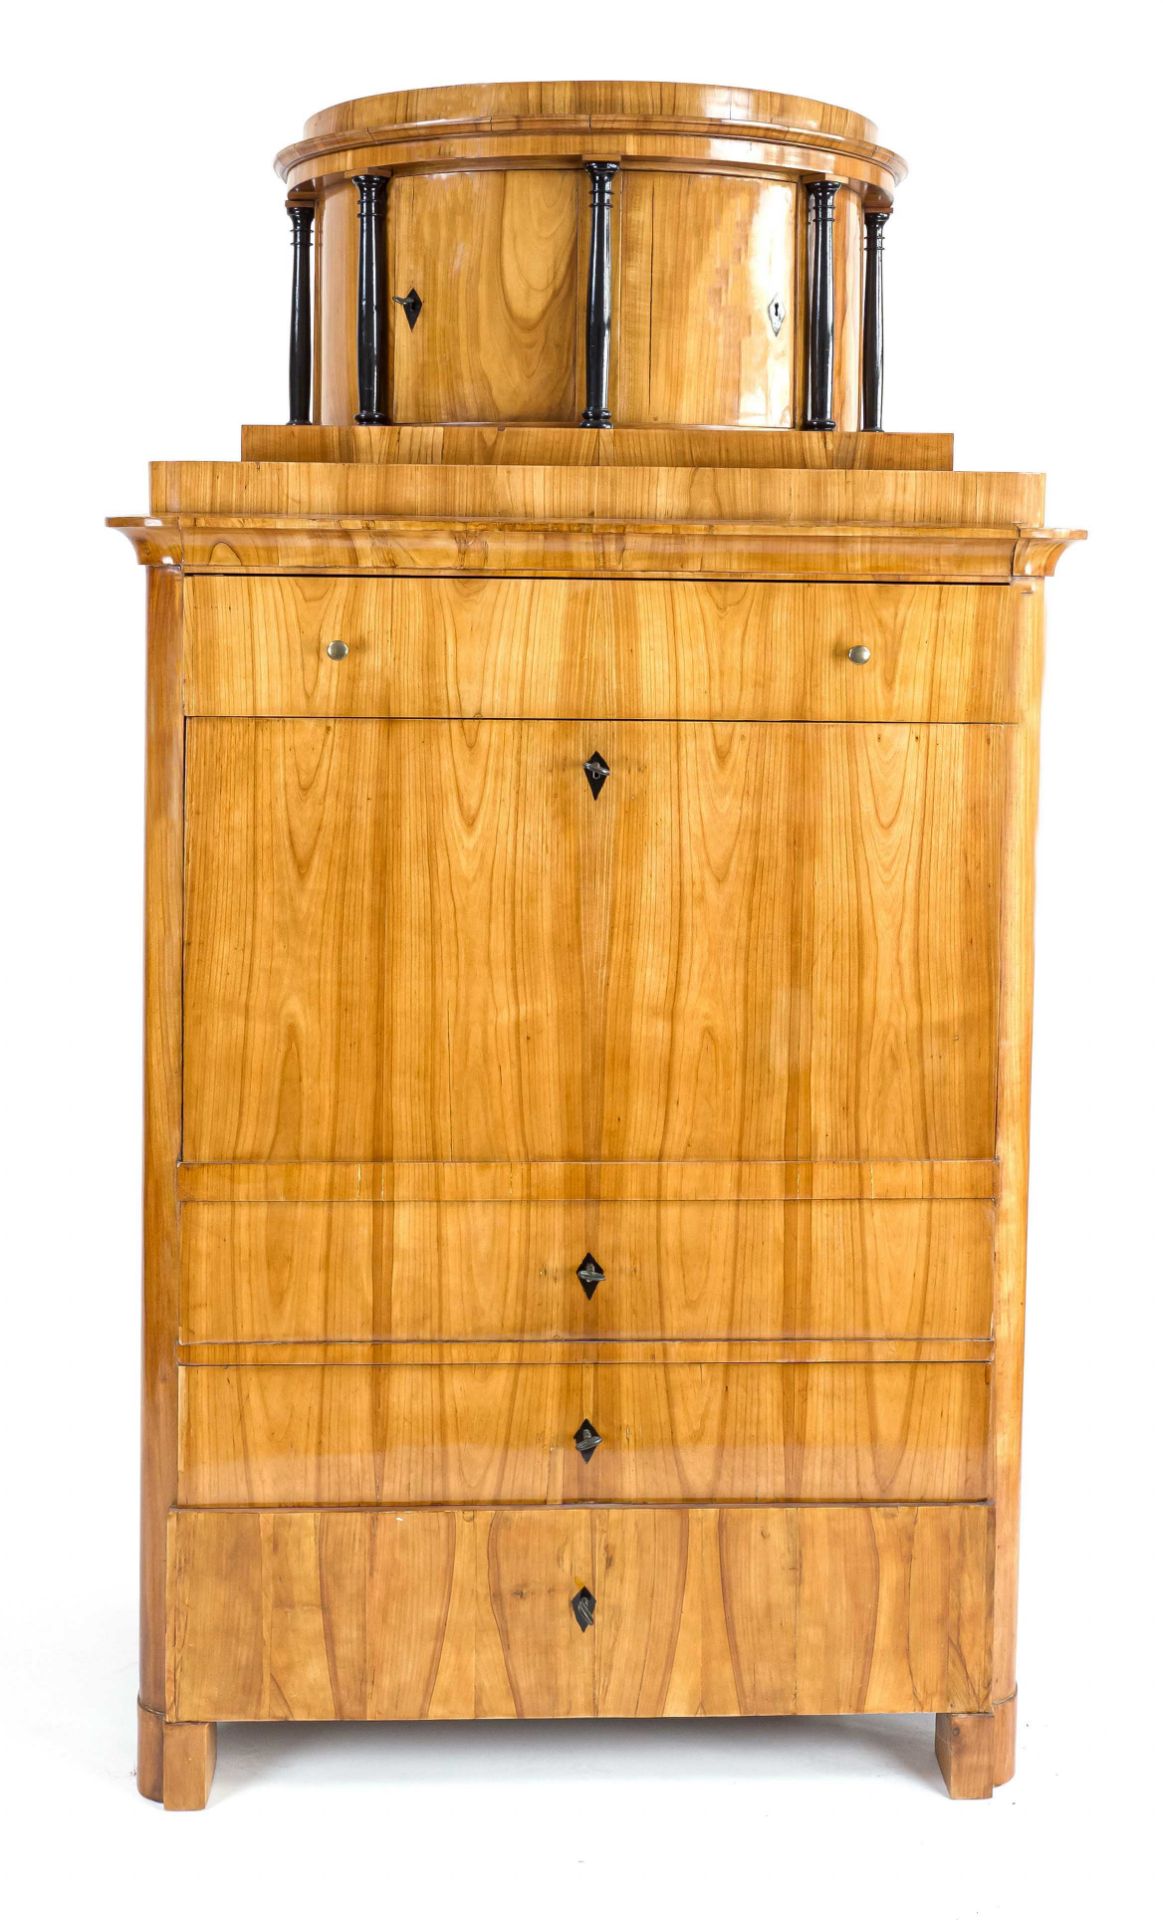 Biedermeier standing secretary, circa 1830, cherrywood, straight body rounded at the corners with